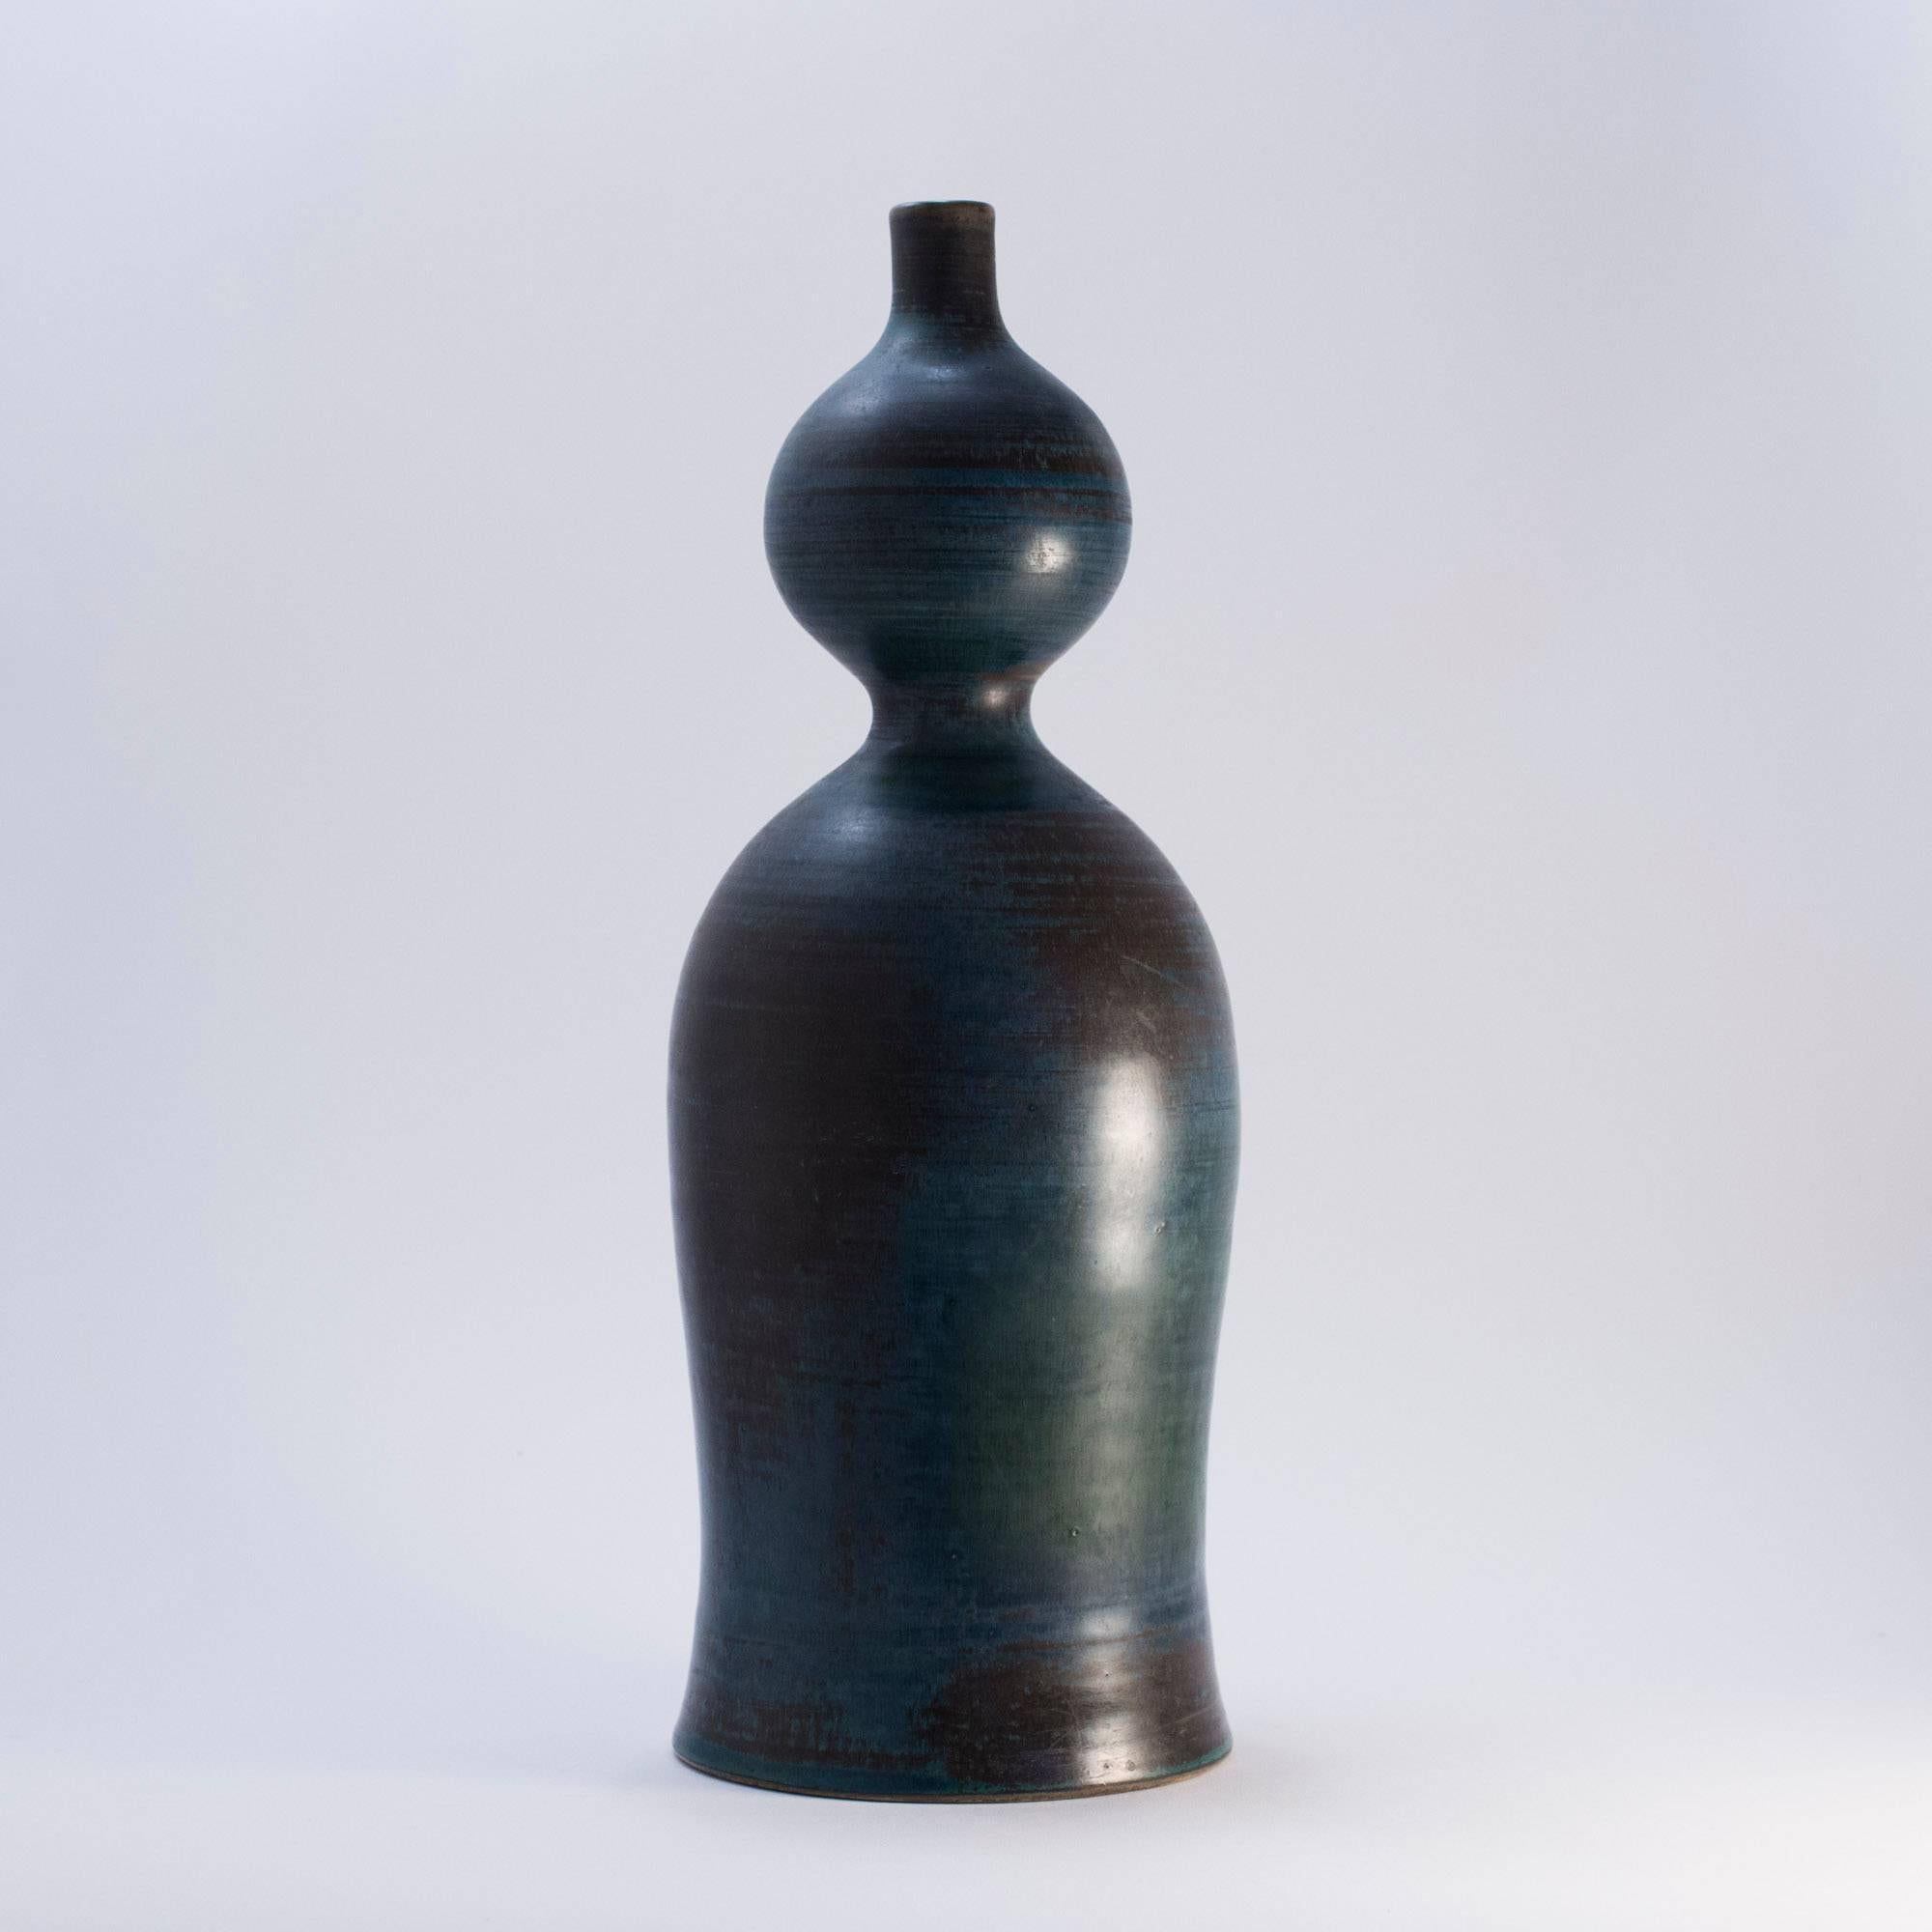 Amazing stoneware vase in a rare design by Stig Lindberg. Undulating silhouette with oriental connotations, yet distinctly Stig Lindberg in style. Sweeping petrol blue glaze alternating with thunderstorm grey in this one-off piece. A real